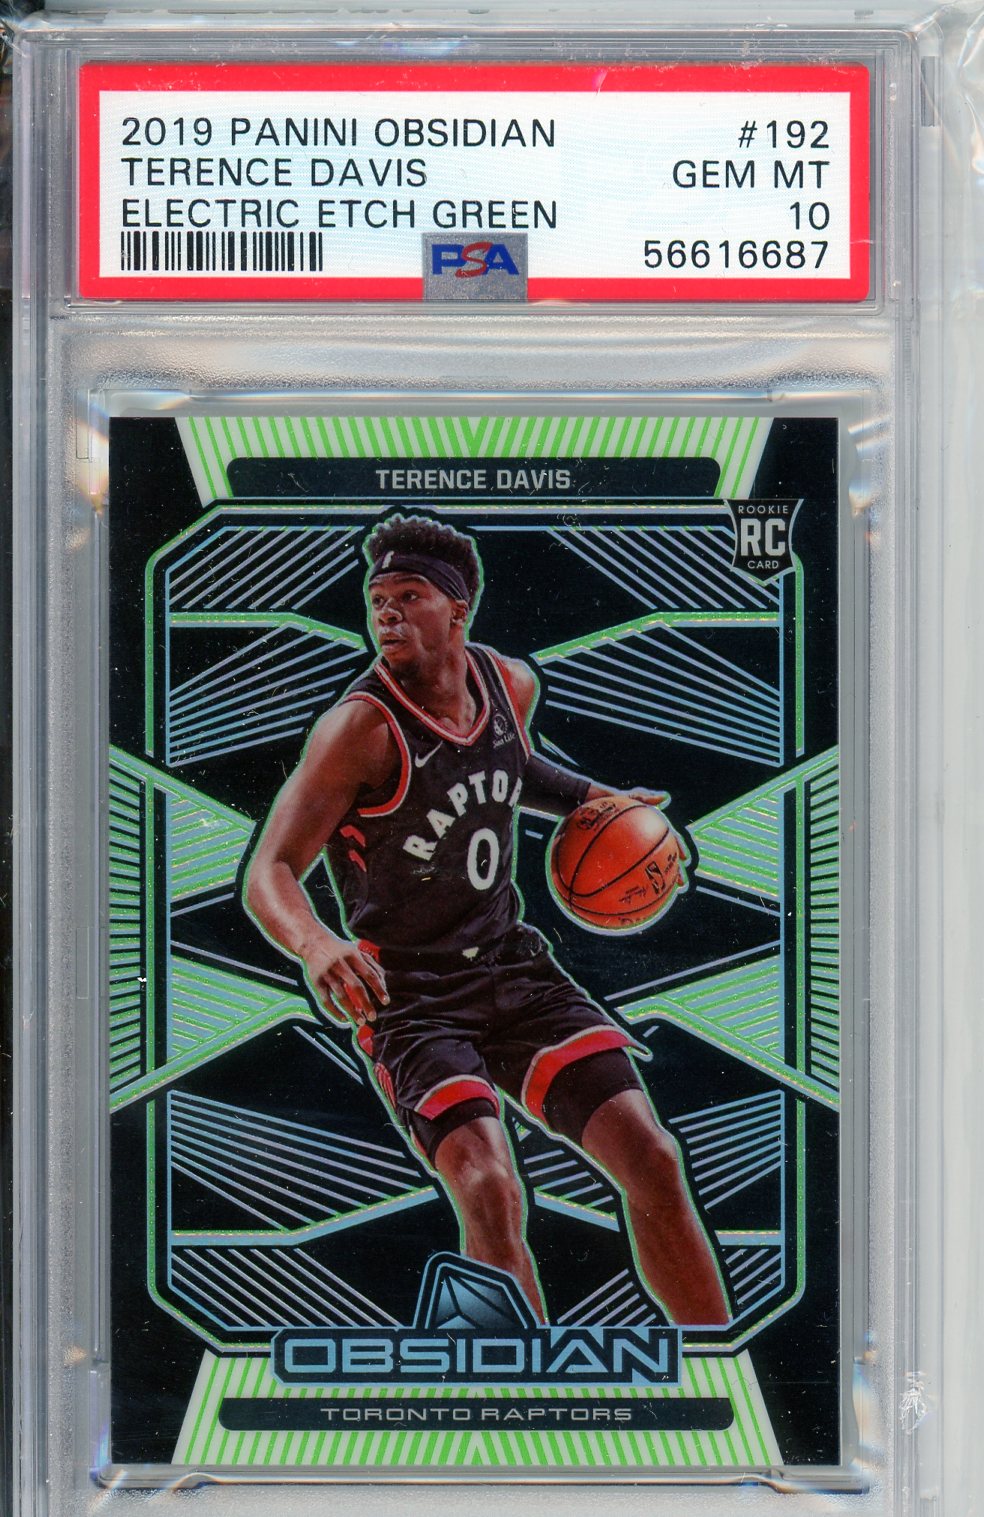 2019 Panini Obsidian Terence Davis Electric Etch Green Rookie Card PSA 10